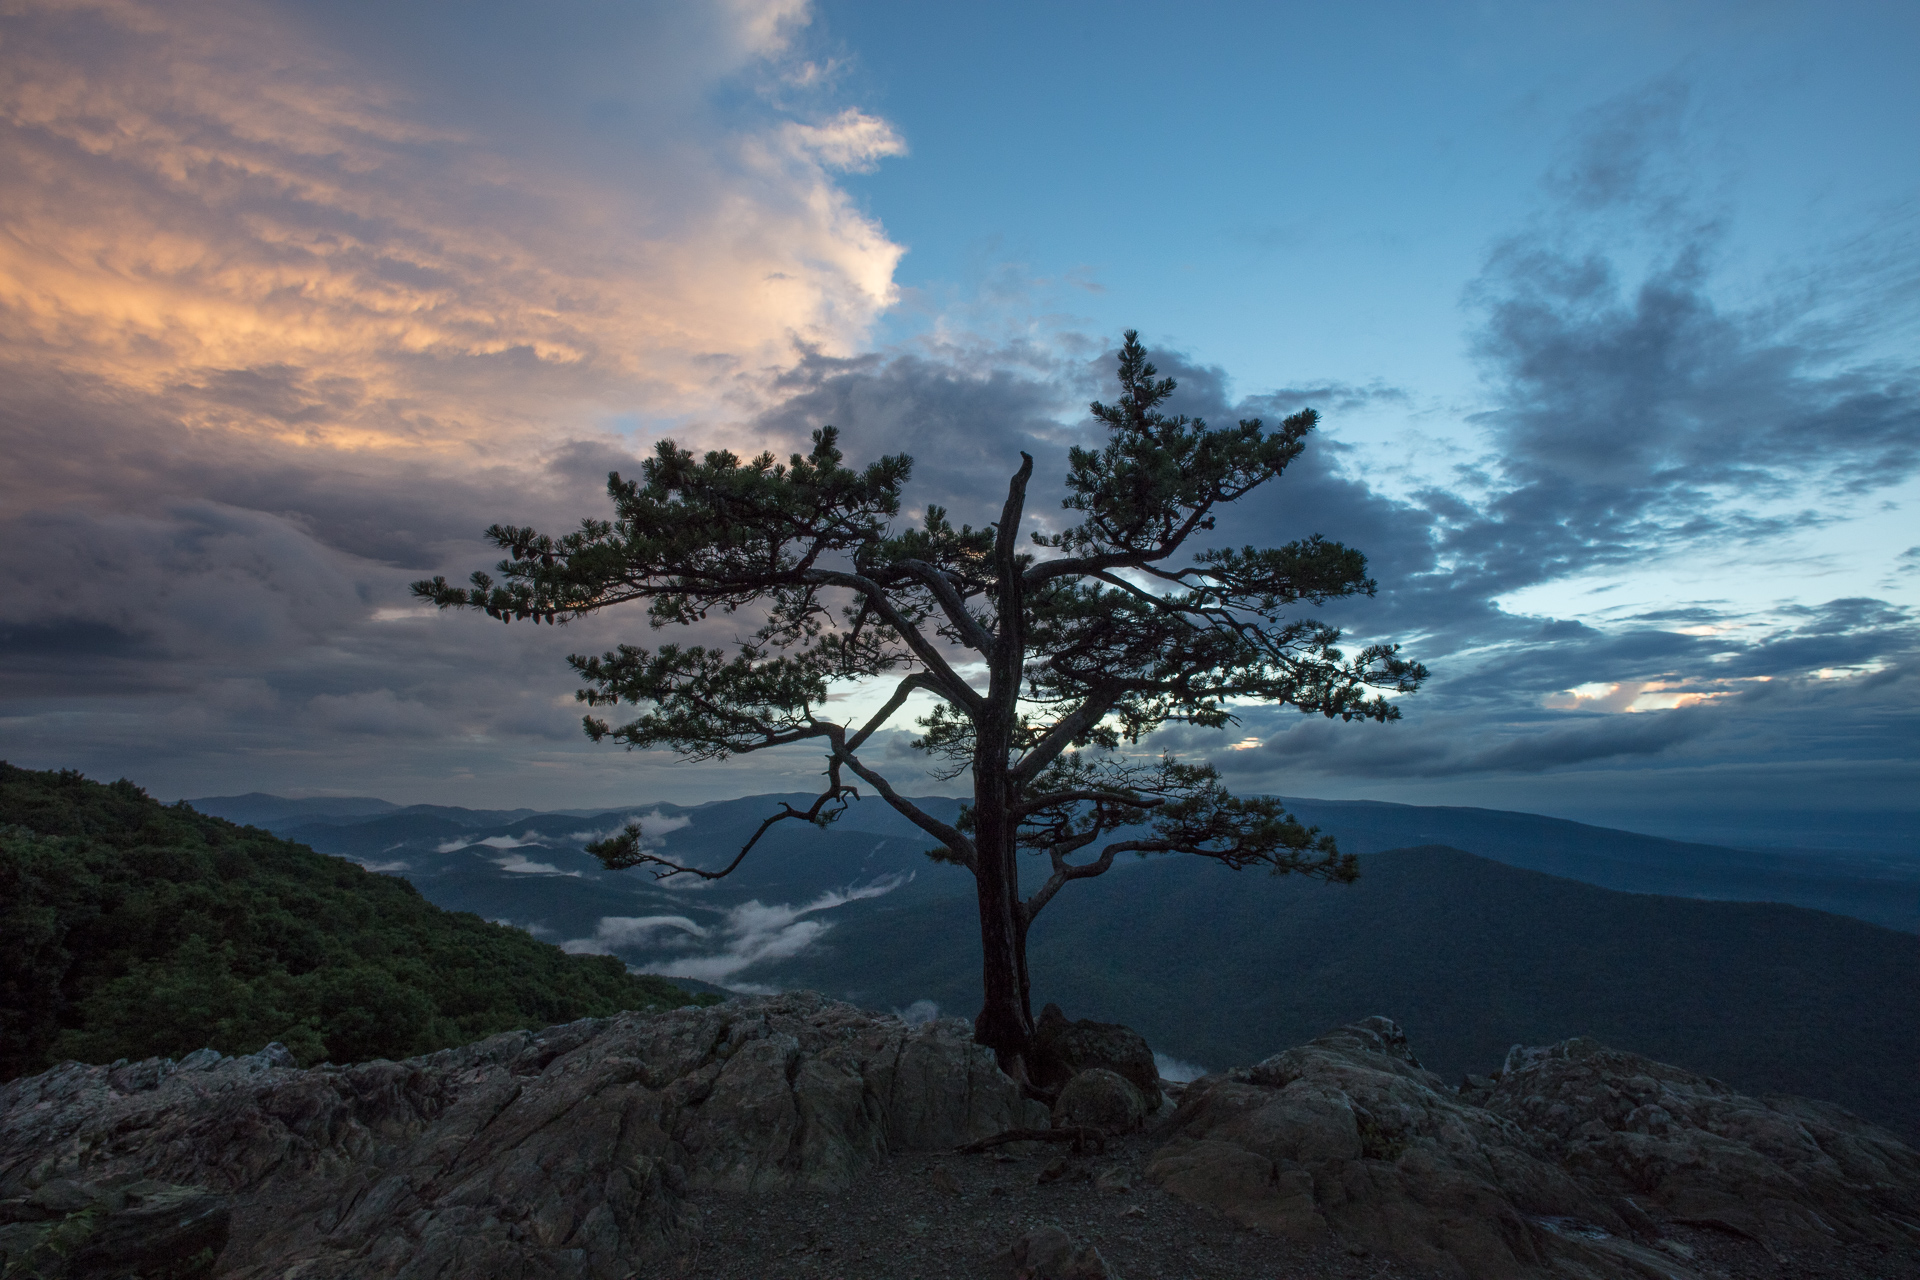 Raven's Roost, lone pine tree